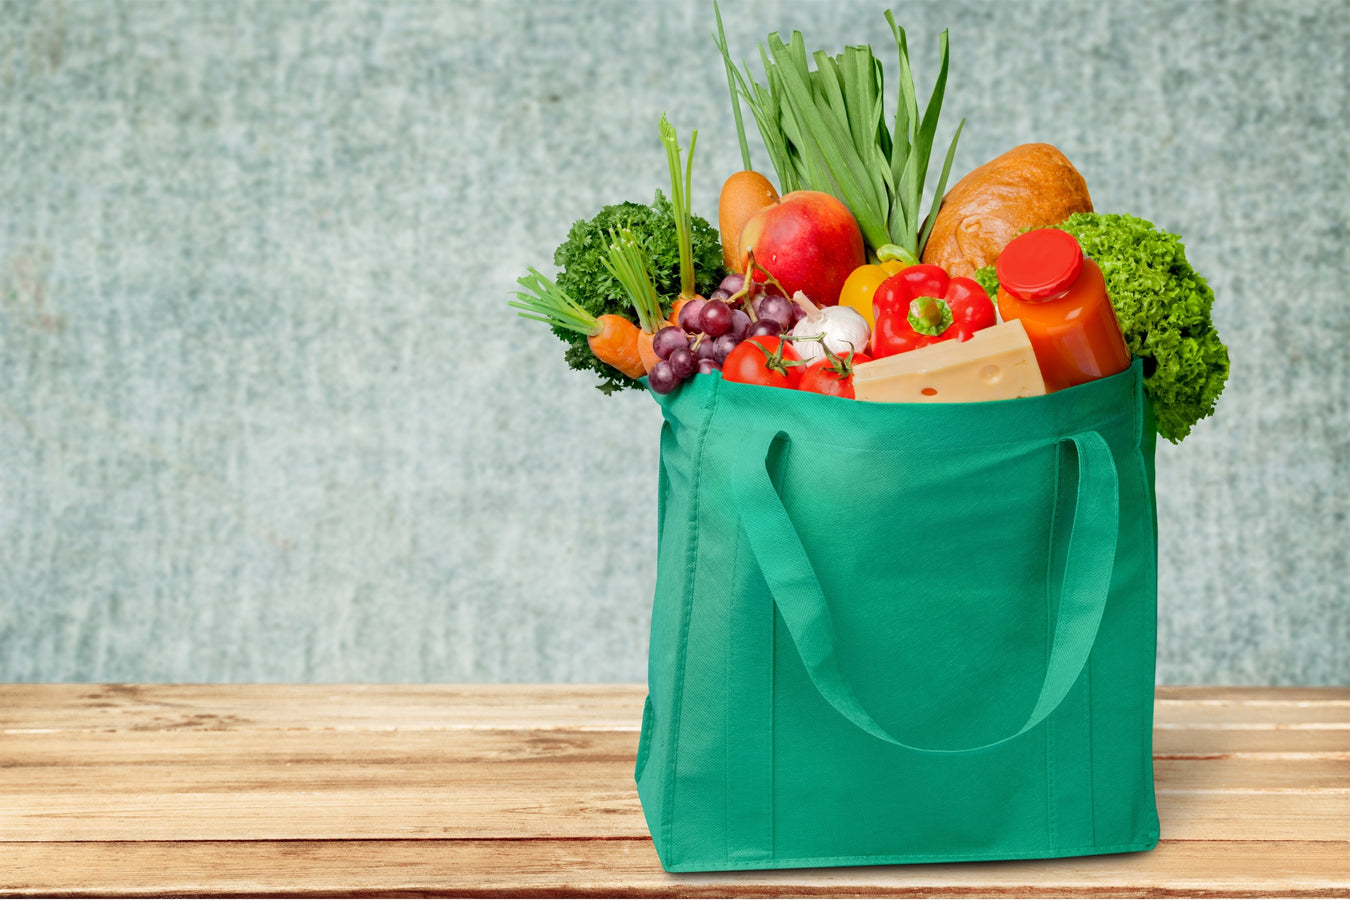 green reusable tote bag filled with groceries